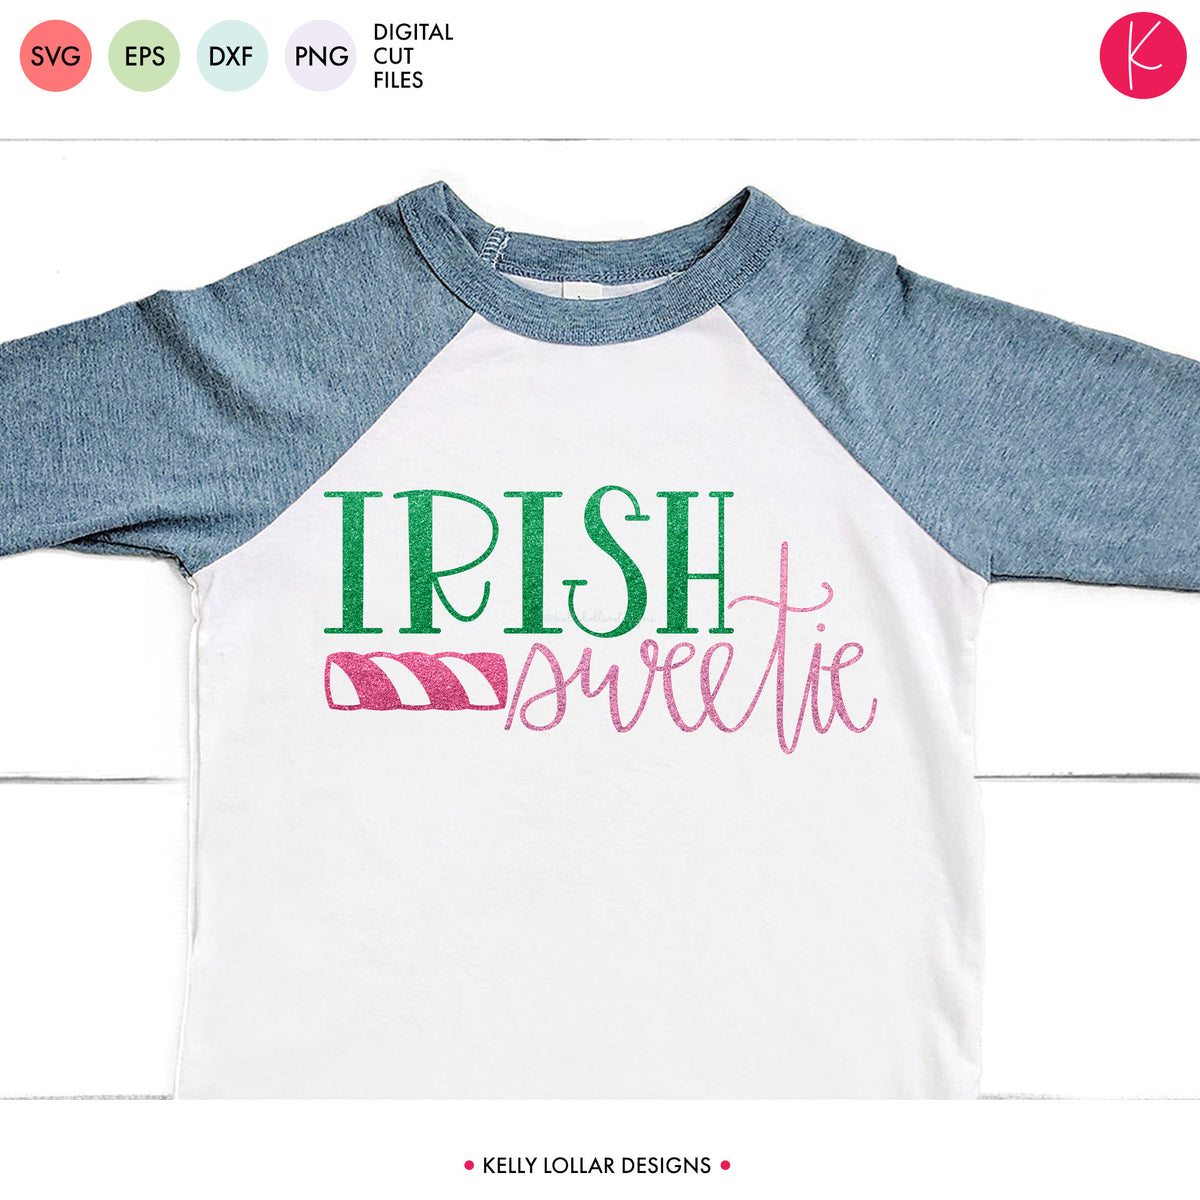 Irish Sweetie | SVG DXF EPS PNG Cut Files